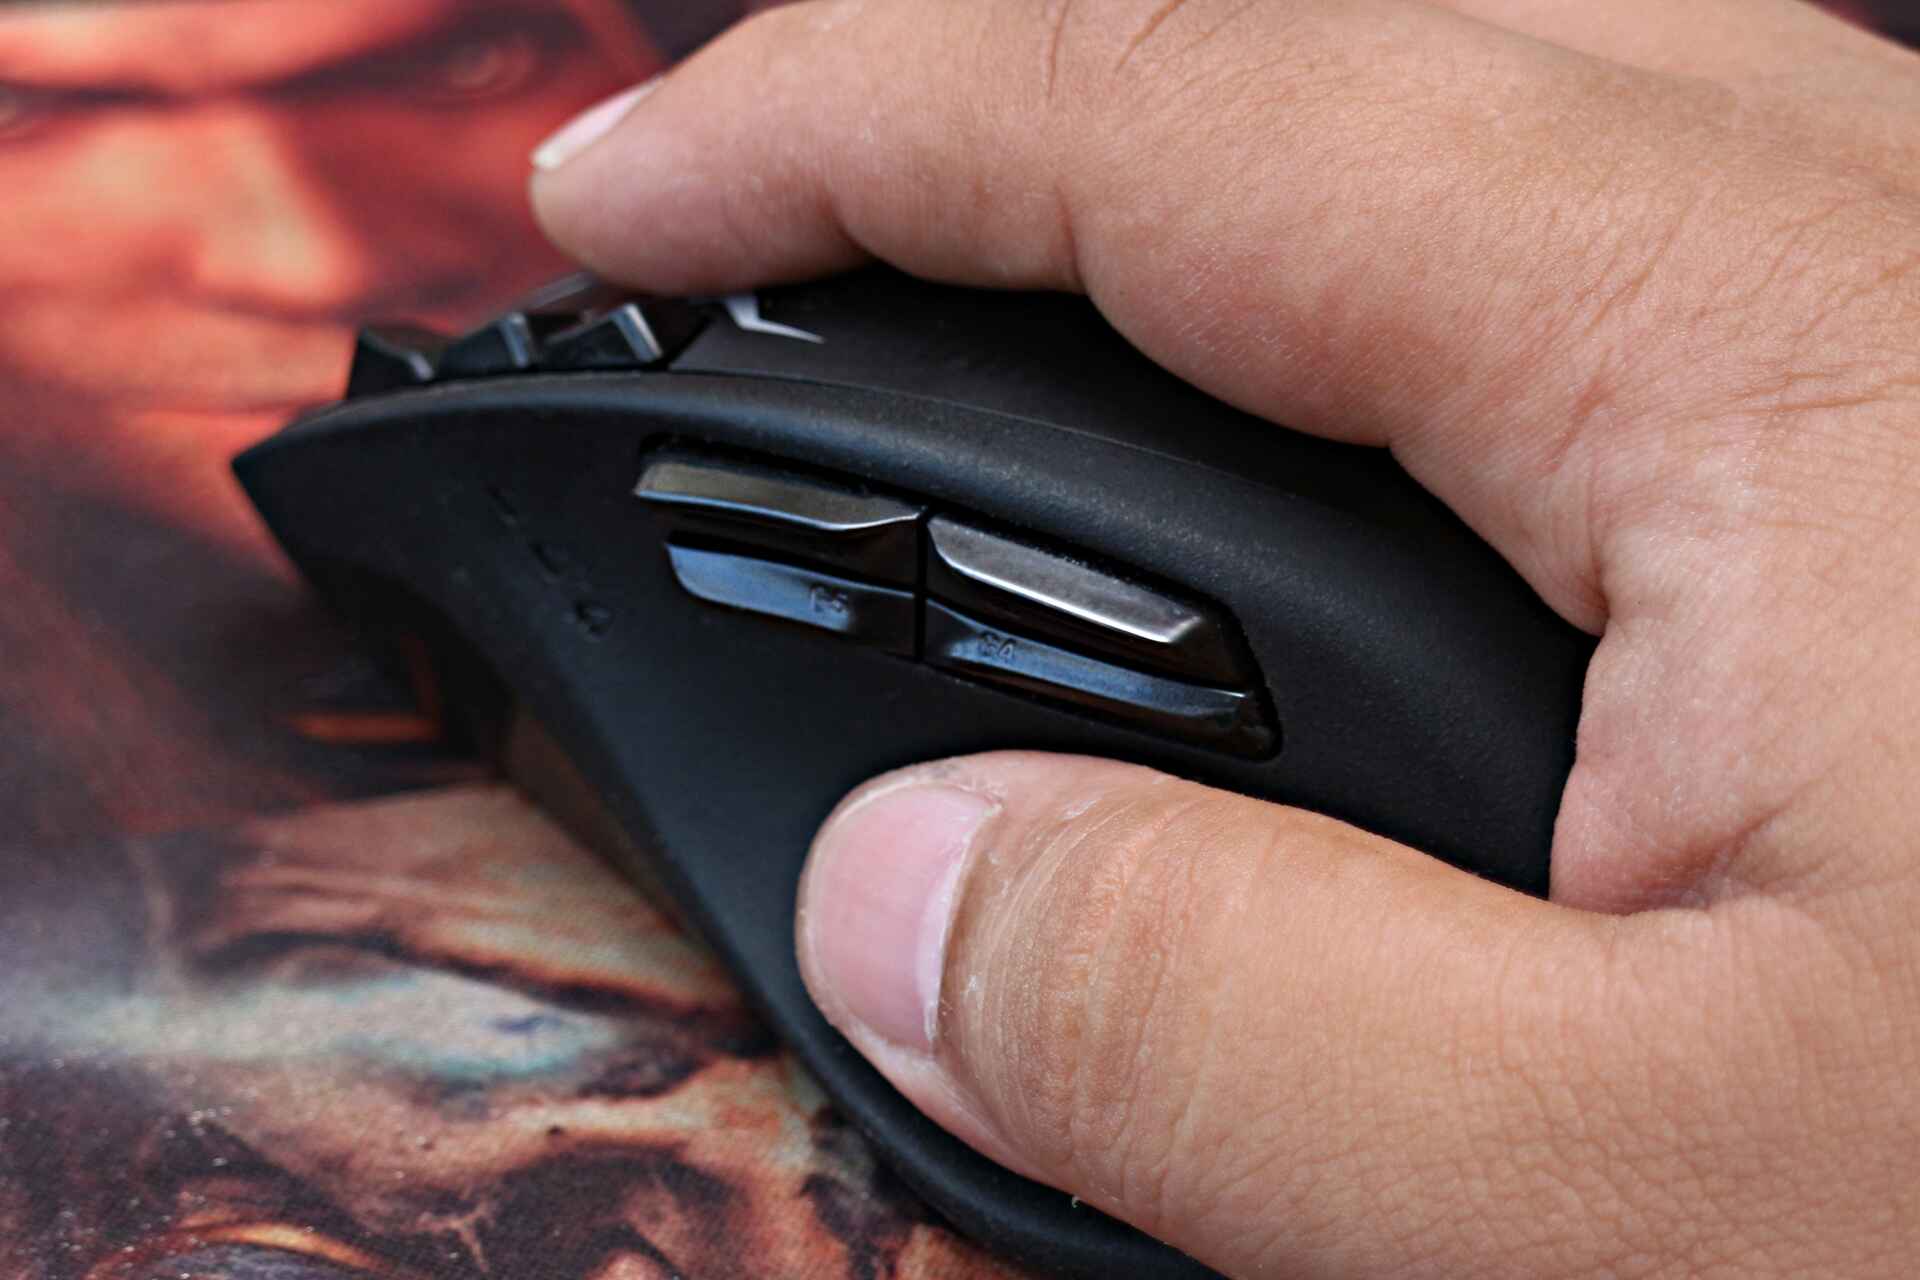 What Are The G6 And G7 Buttons For On The Logitech G600 MMO Gaming Mouse?